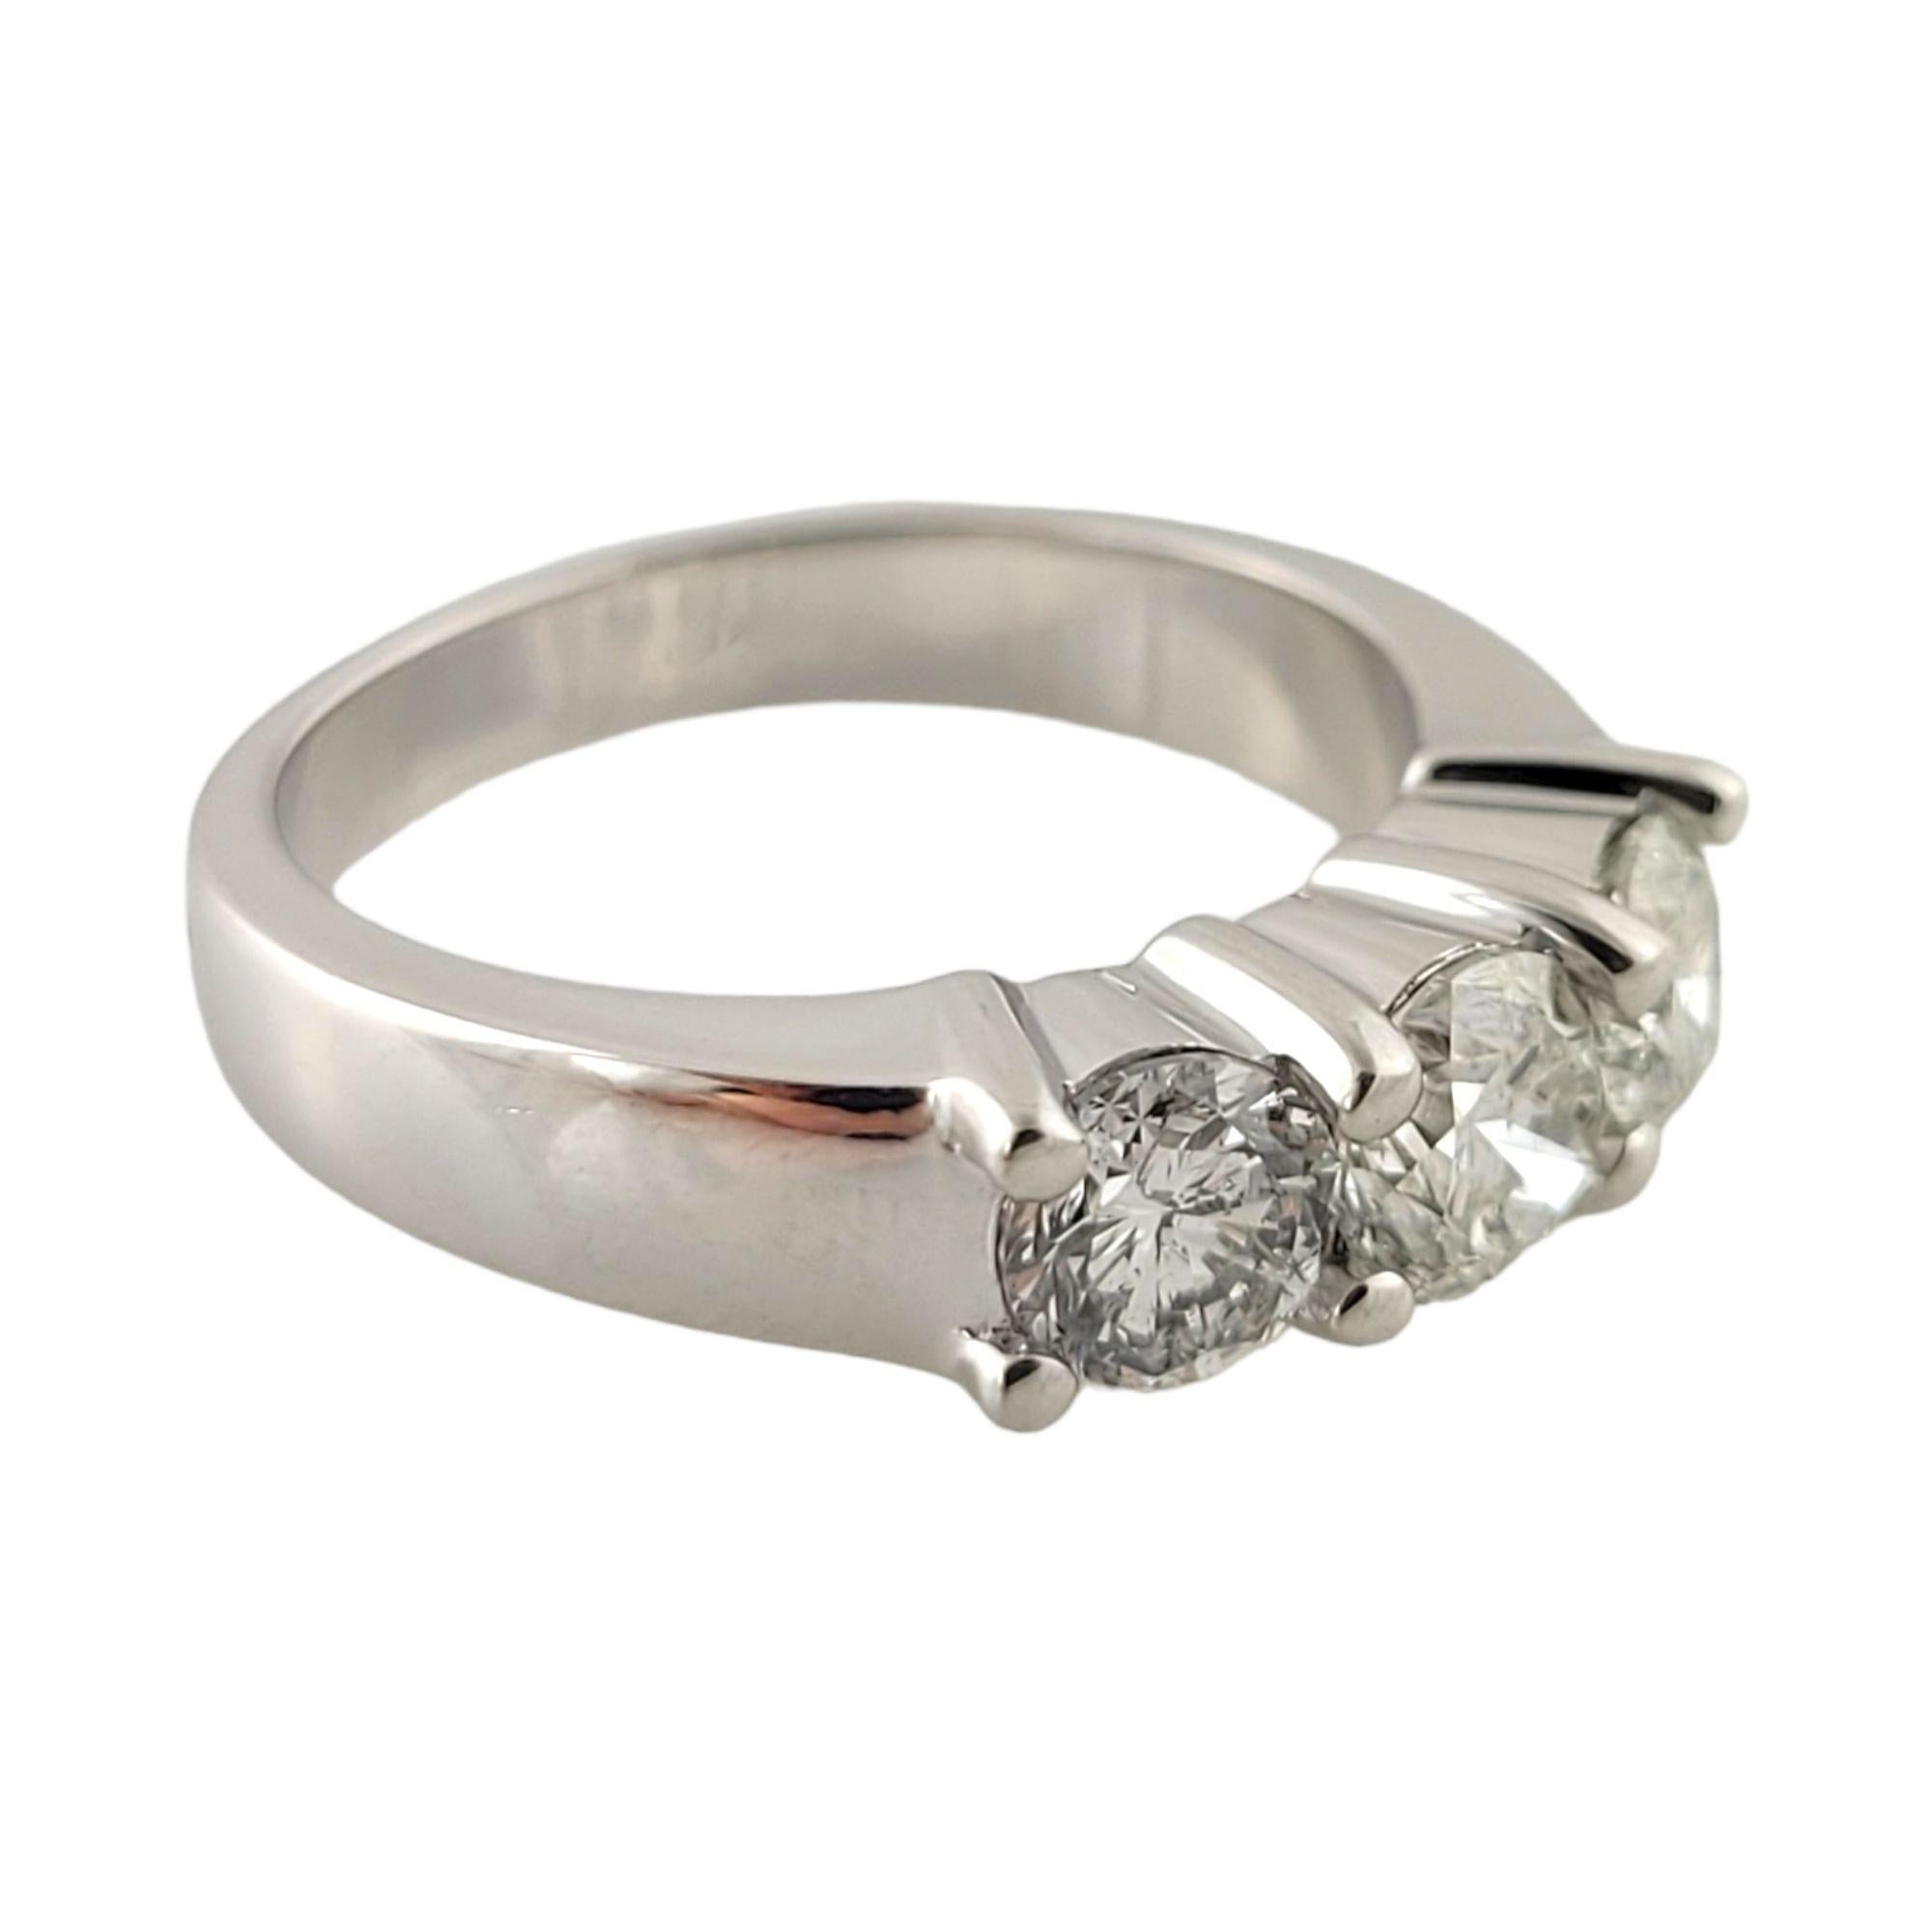 14K White Gold Three Diamond Ring

Three round brilliant diamonds are set in a white gold band.

Diamonds are approx. .40cts, .50 cts, and .42 cts for a total of approx. 1.32cts.

Diamond Clarity: I1-I2
Diamond Color: I

Size 6.75

6.5g / 4.2